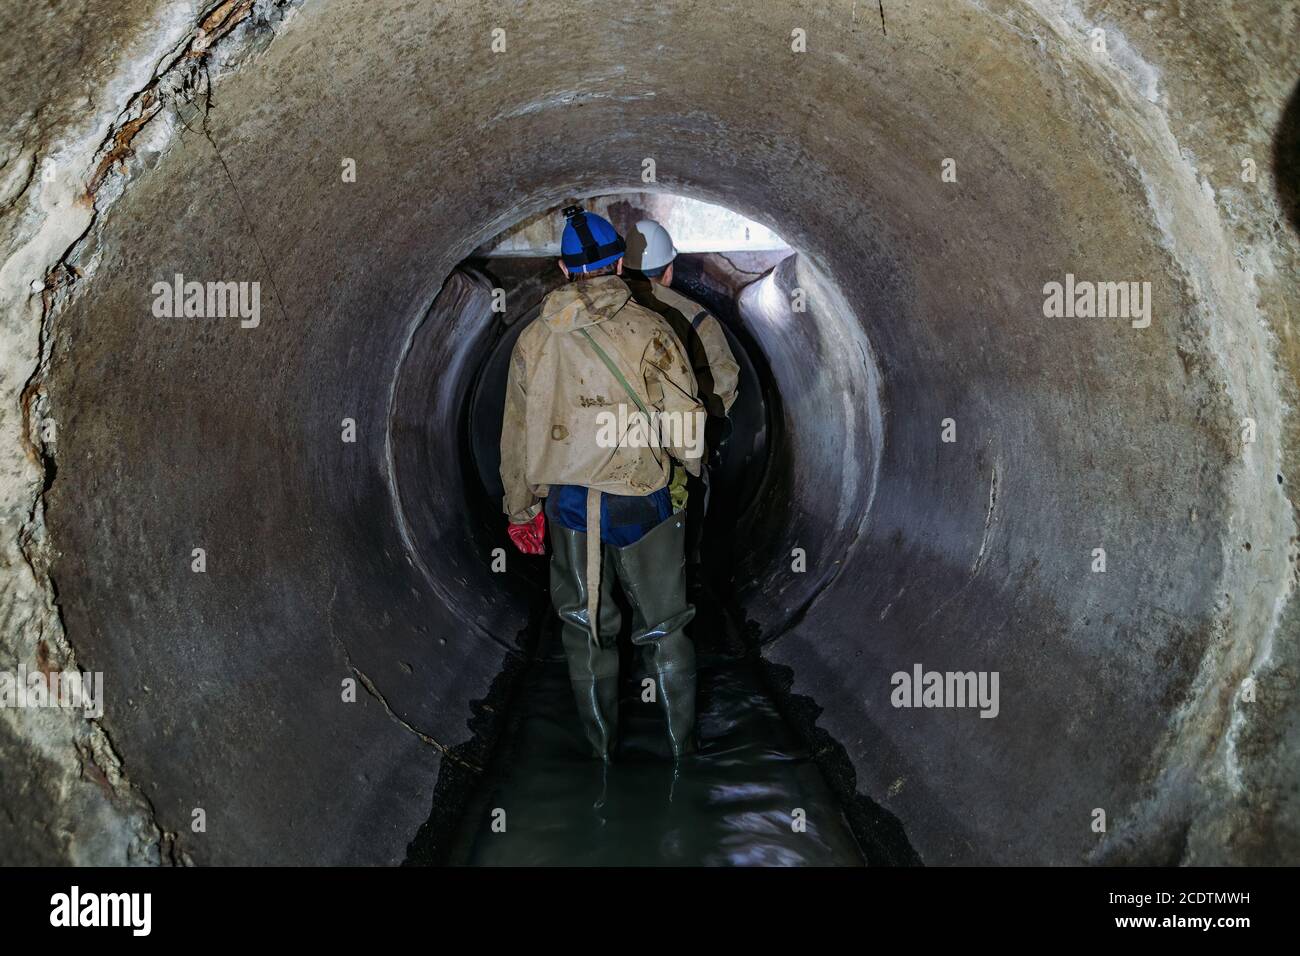 Sewer tunnel worker examines sewer system damage and wastewater leakage Stock Photo